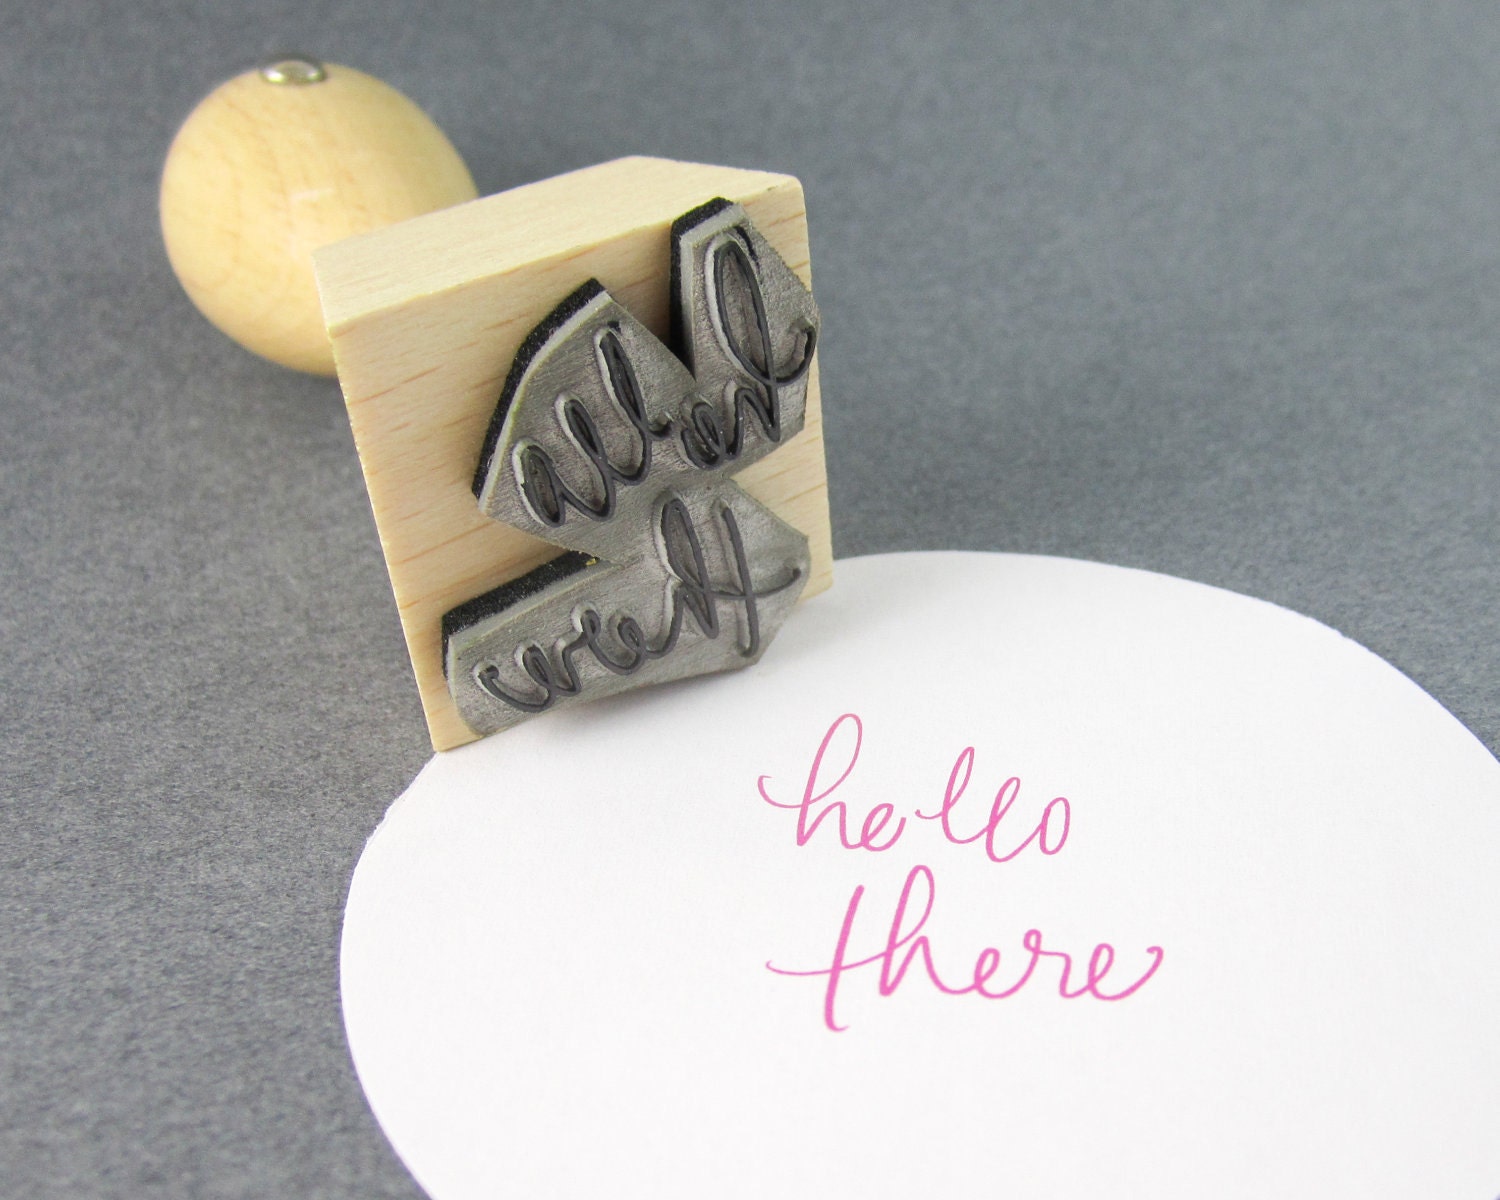 Rubber Stamp - Hello there hand lettered rubber stamp, laser cut - 1 1/4 inches